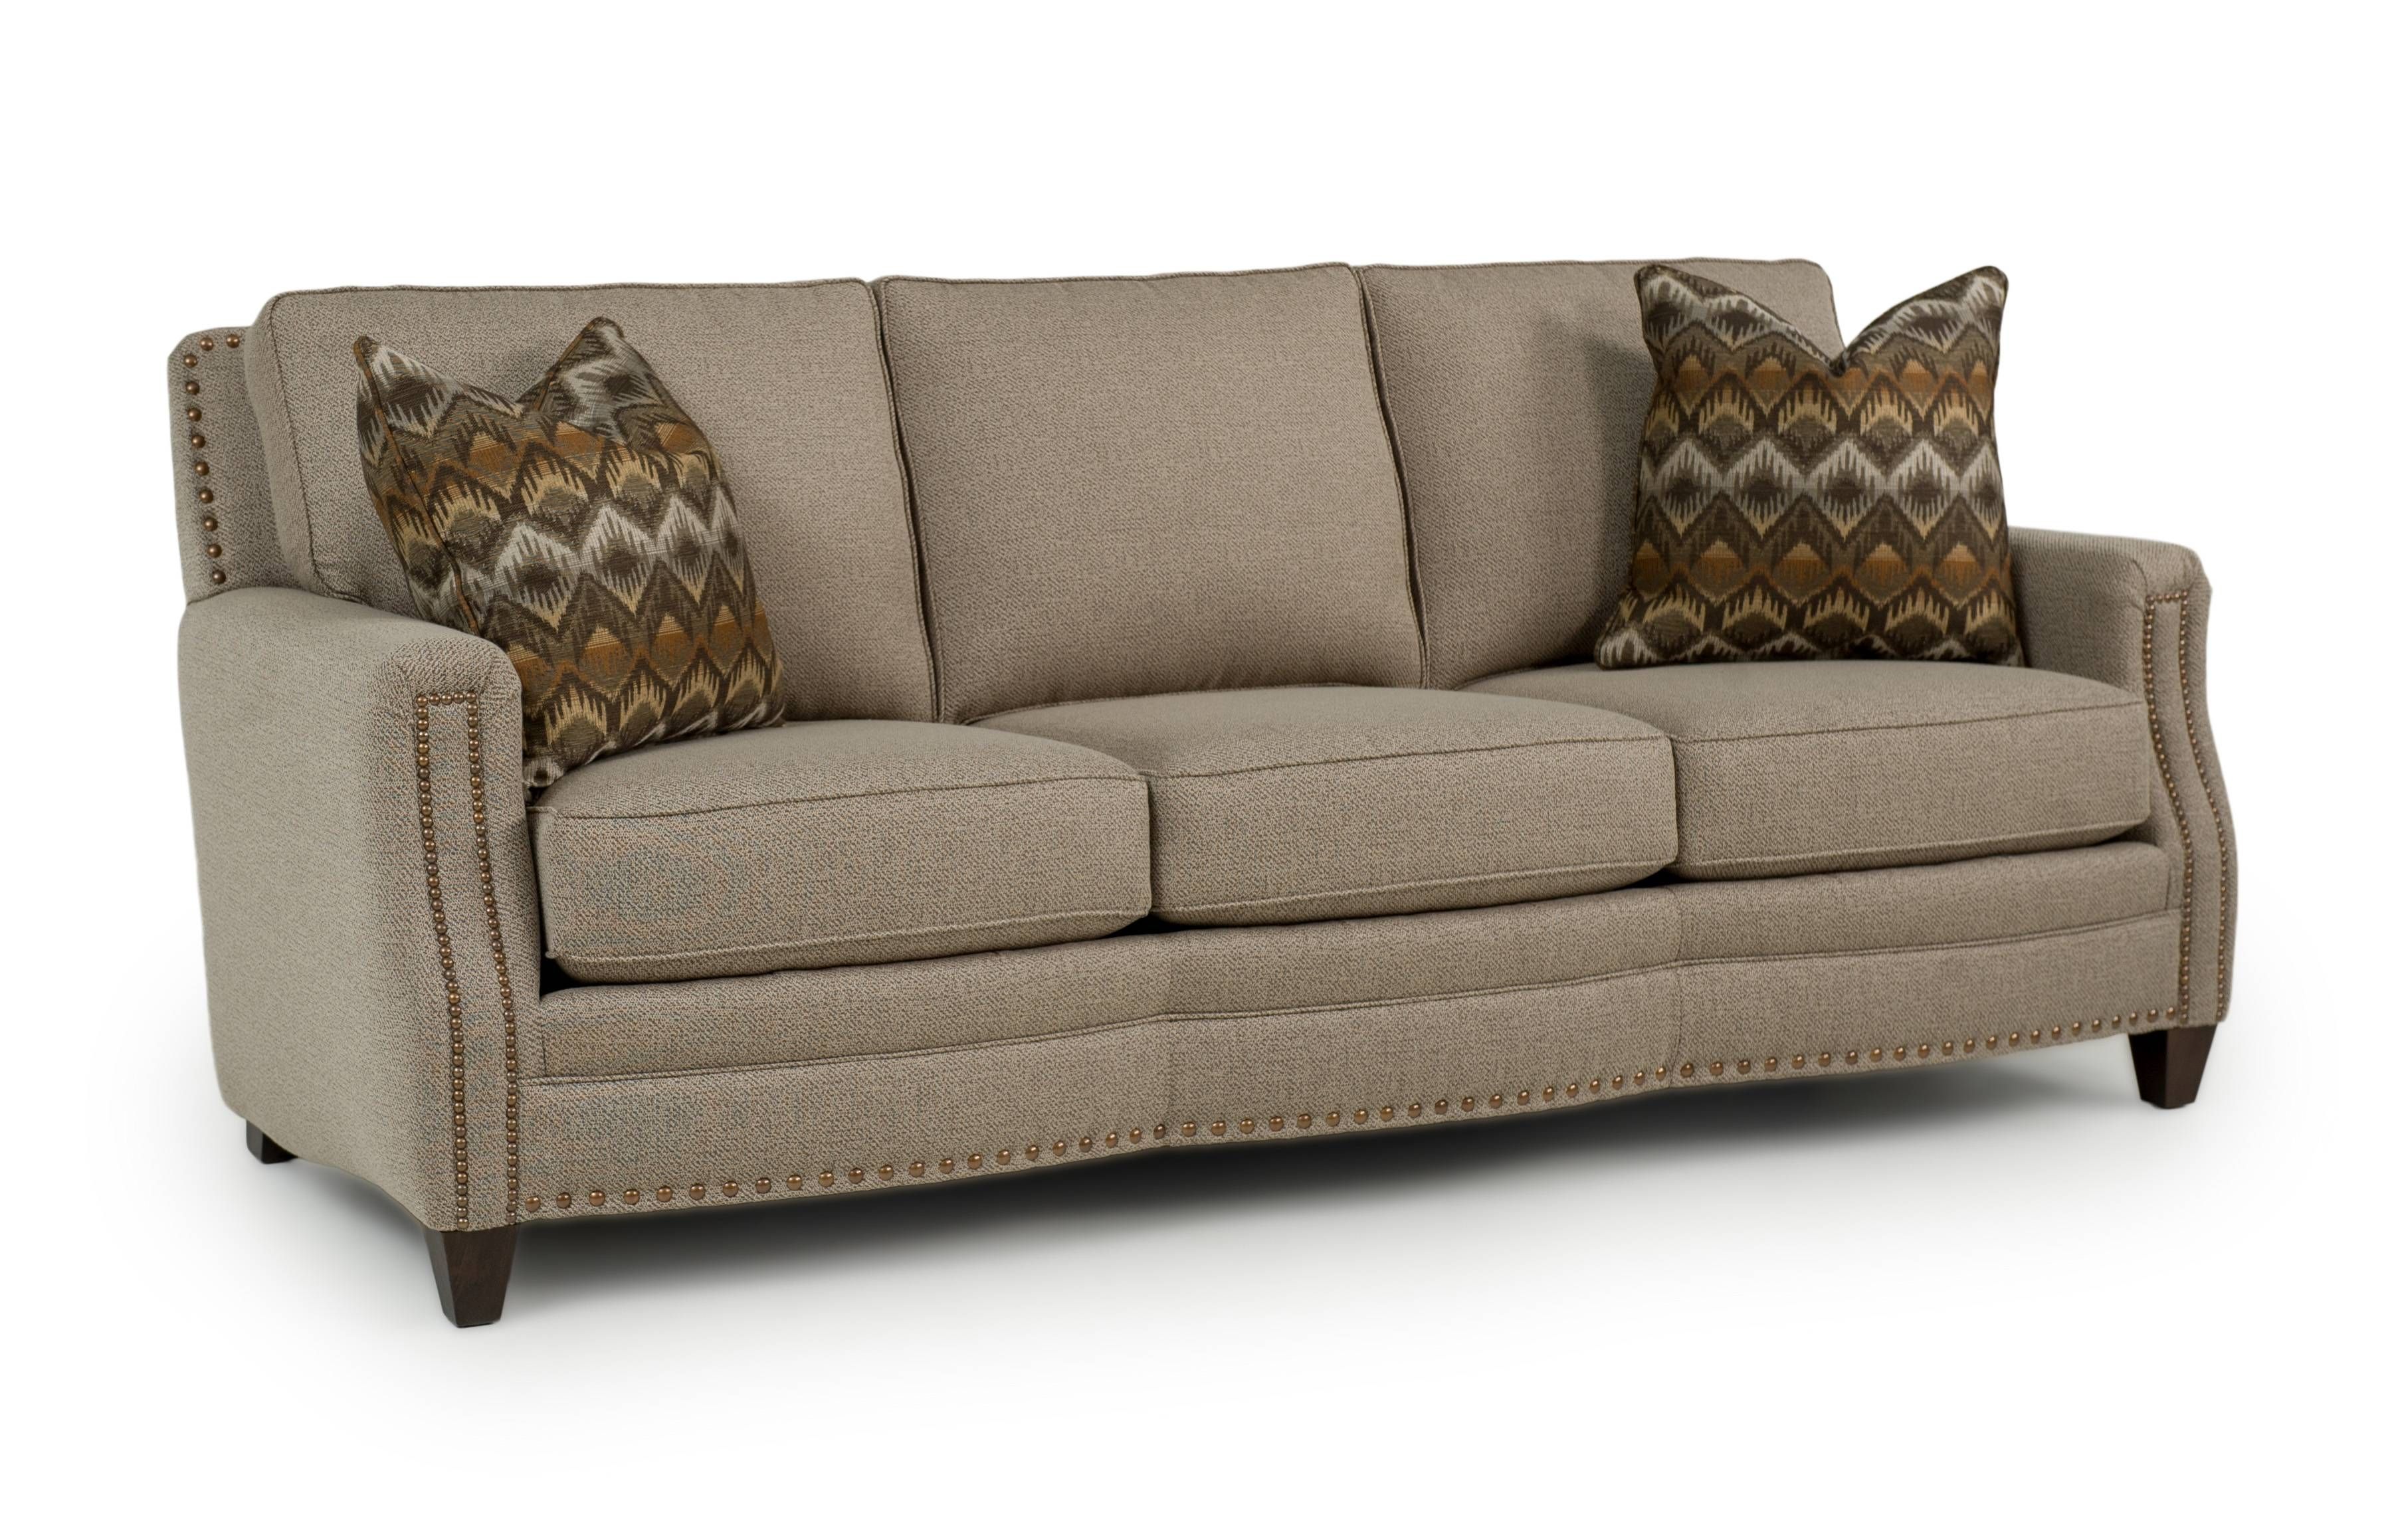 Smith Brothers Of Berne | Saugerties Furniture Inside Broyhill Larissa Sofas (View 12 of 15)